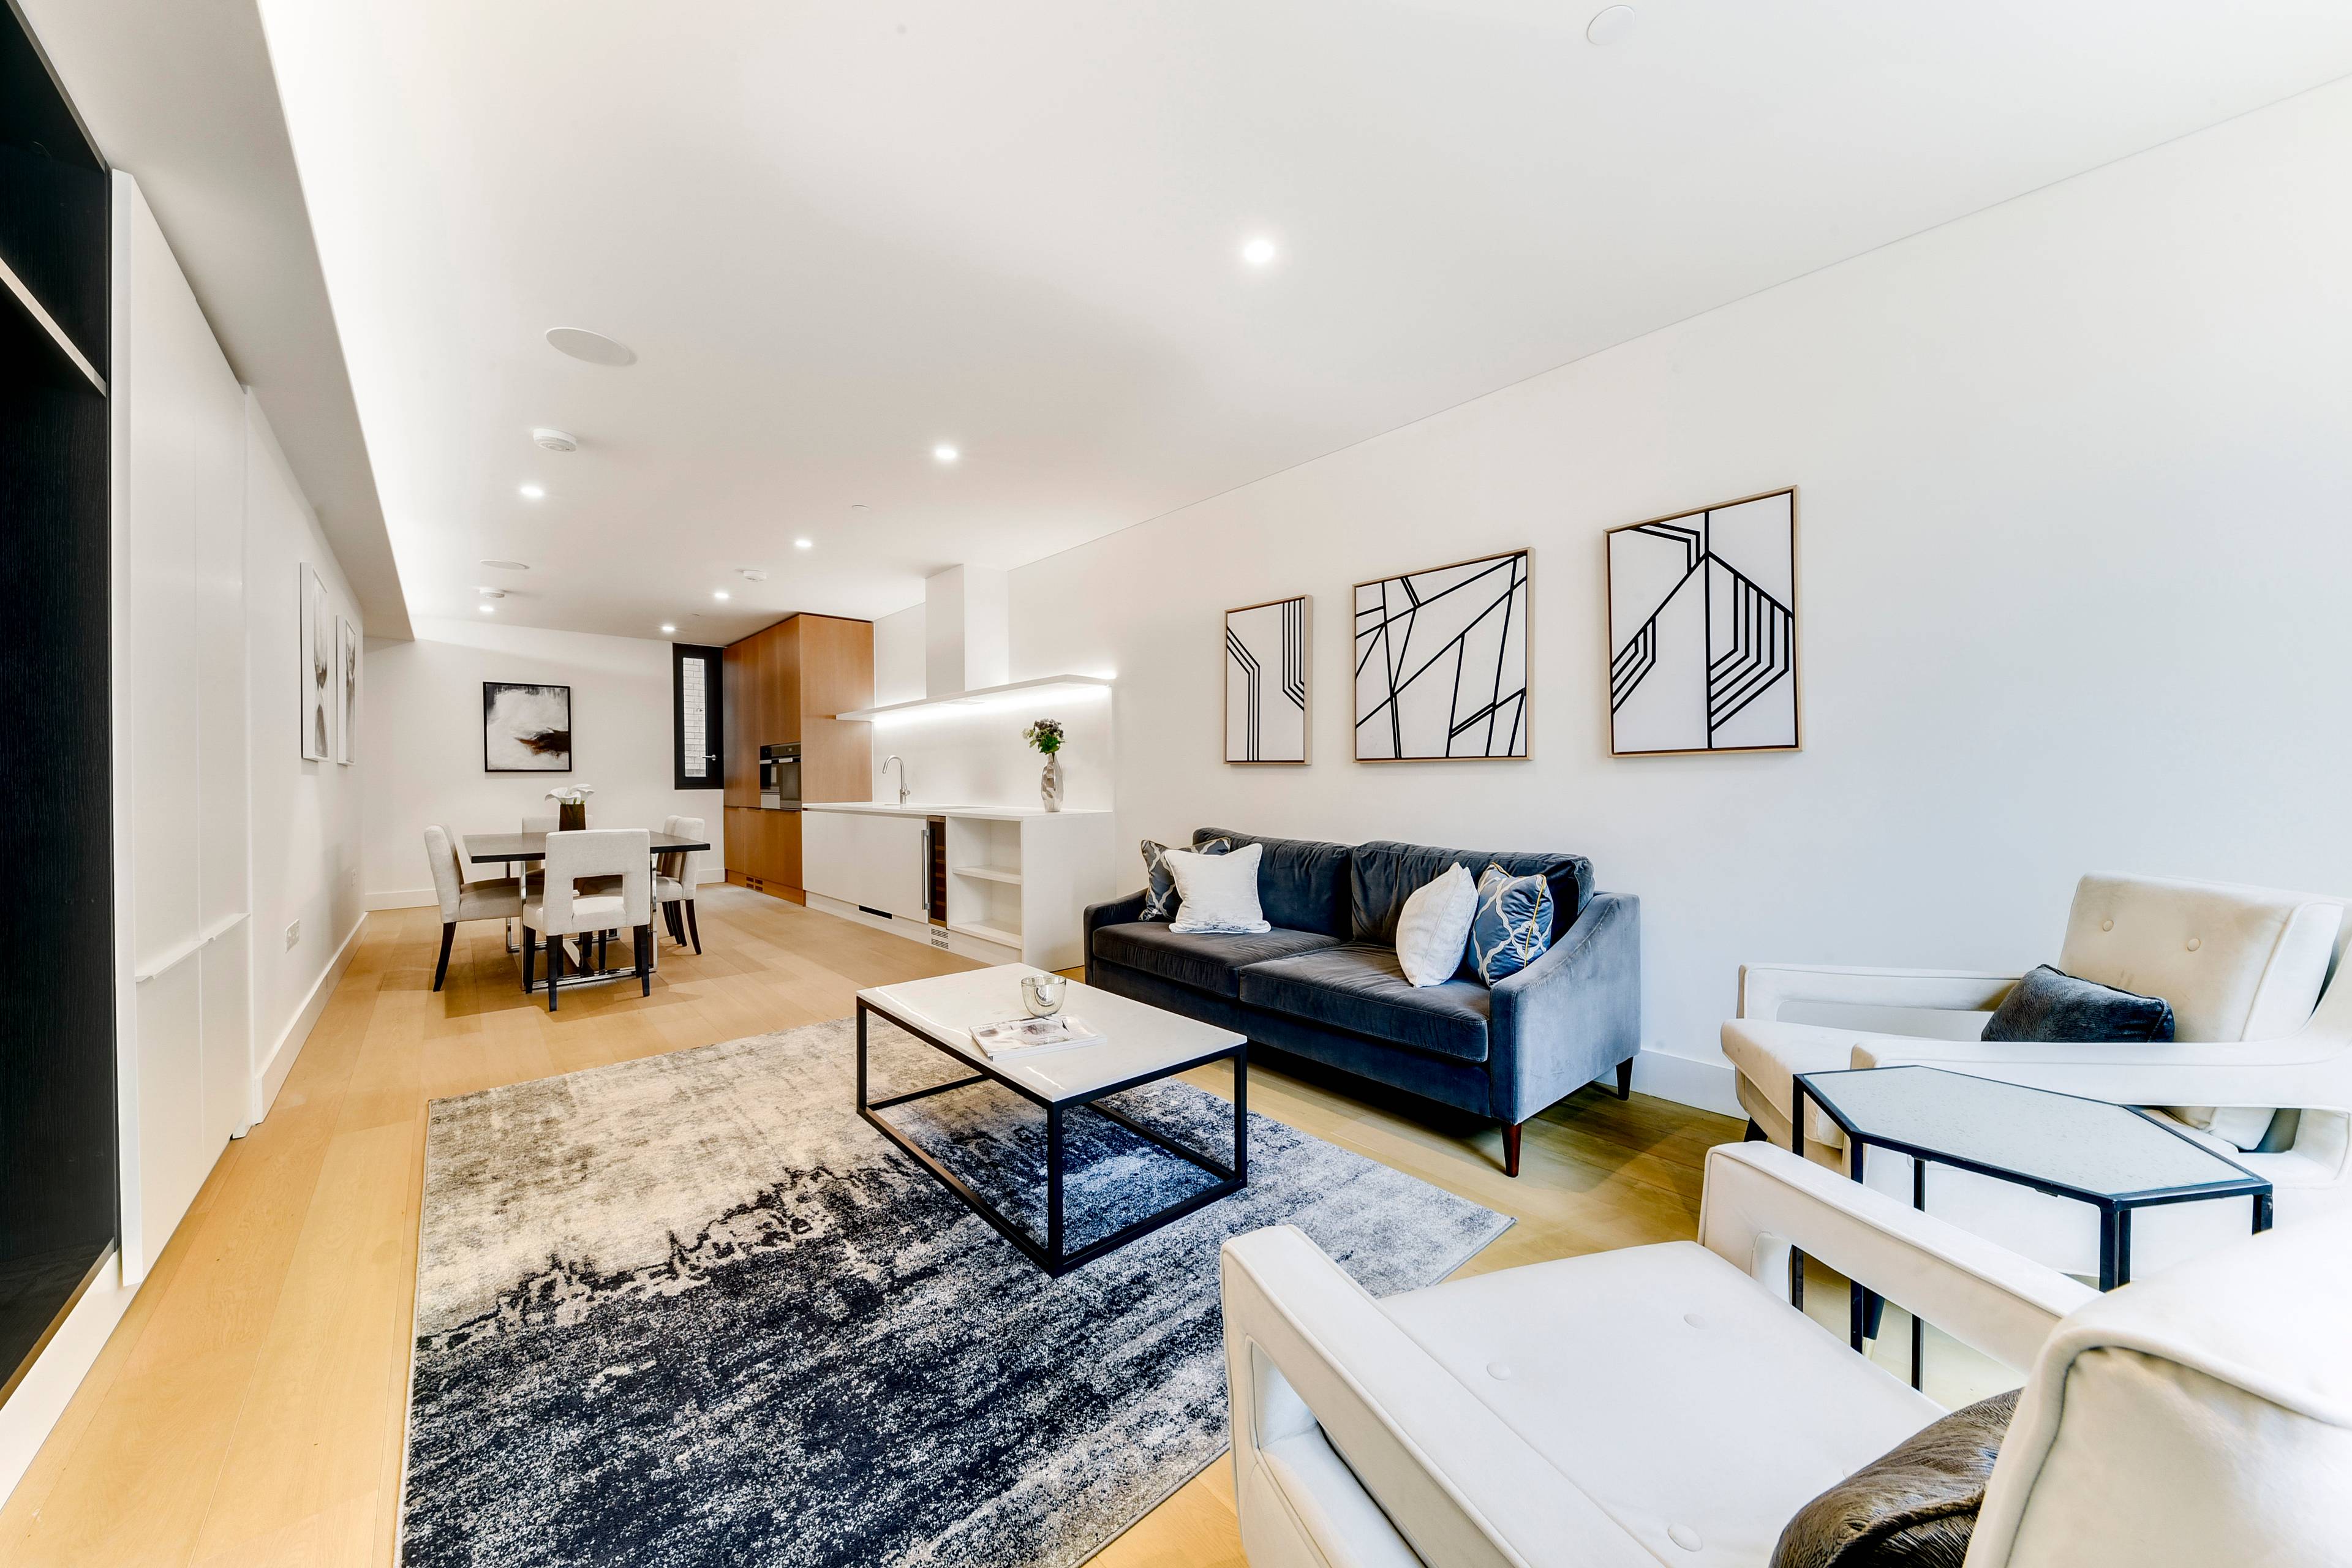 This superb two bed and two bath apartment will be a perfect base to experience everything innermost London life has to offer.